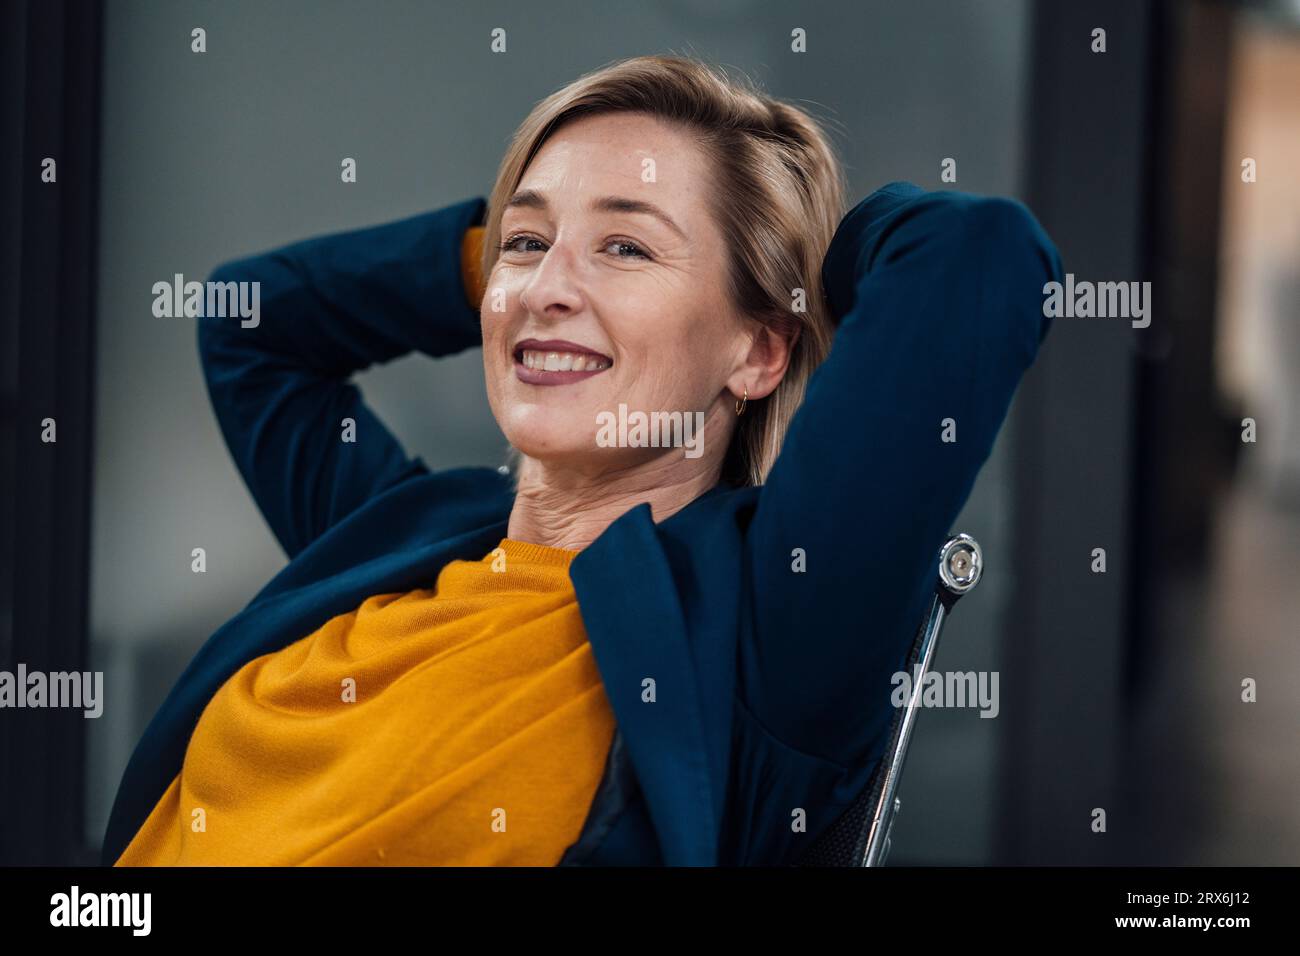 Smiling businesswoman with hands behind head at work place Stock Photo